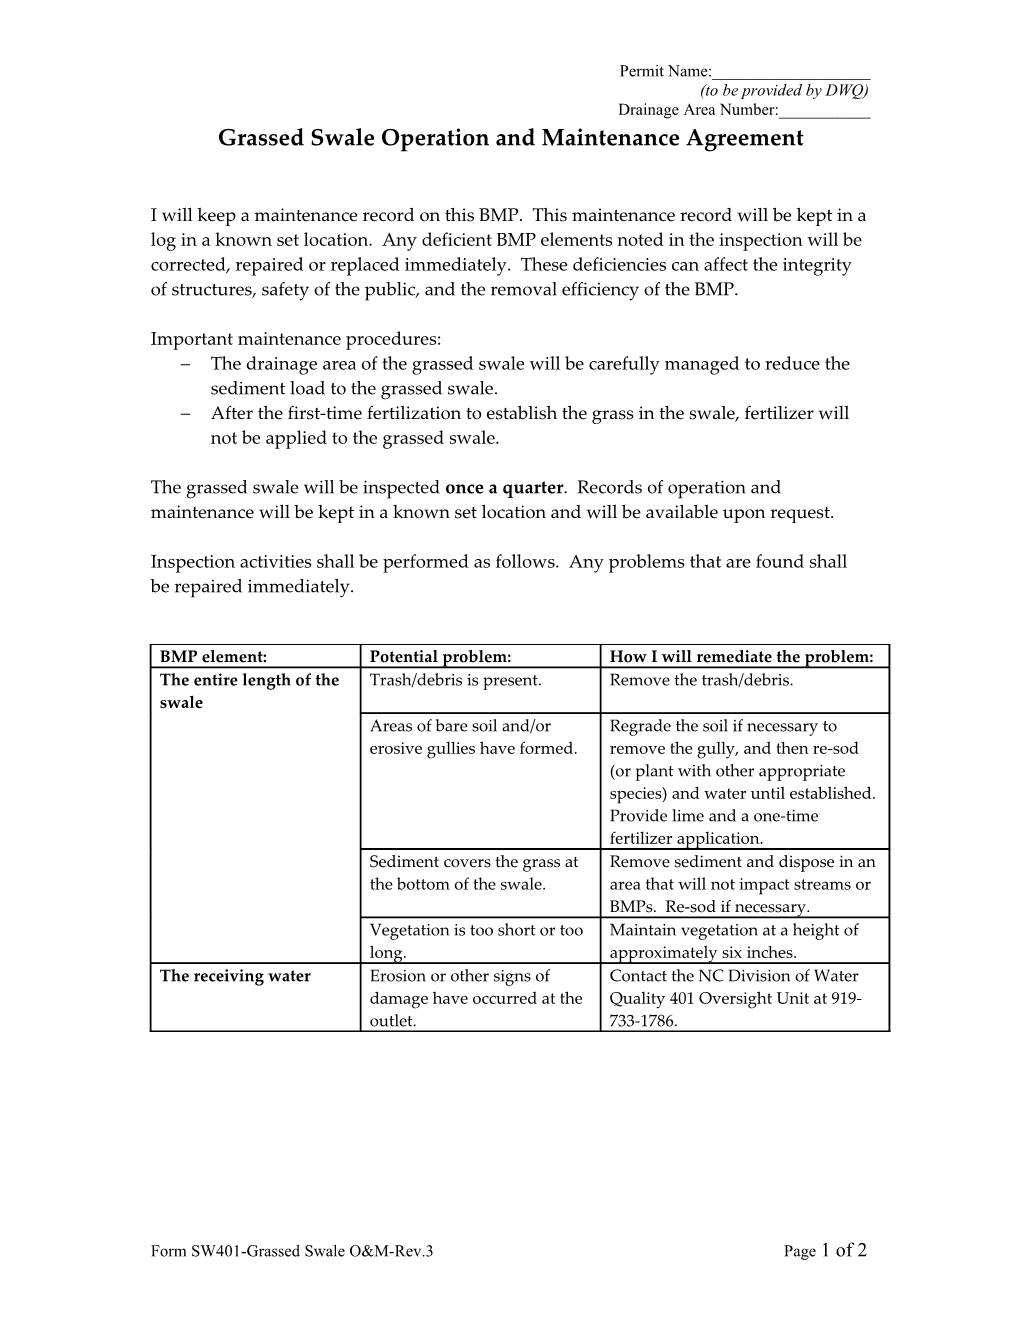 Wet Detention Basin Inspection and Maintenance Agreement s1